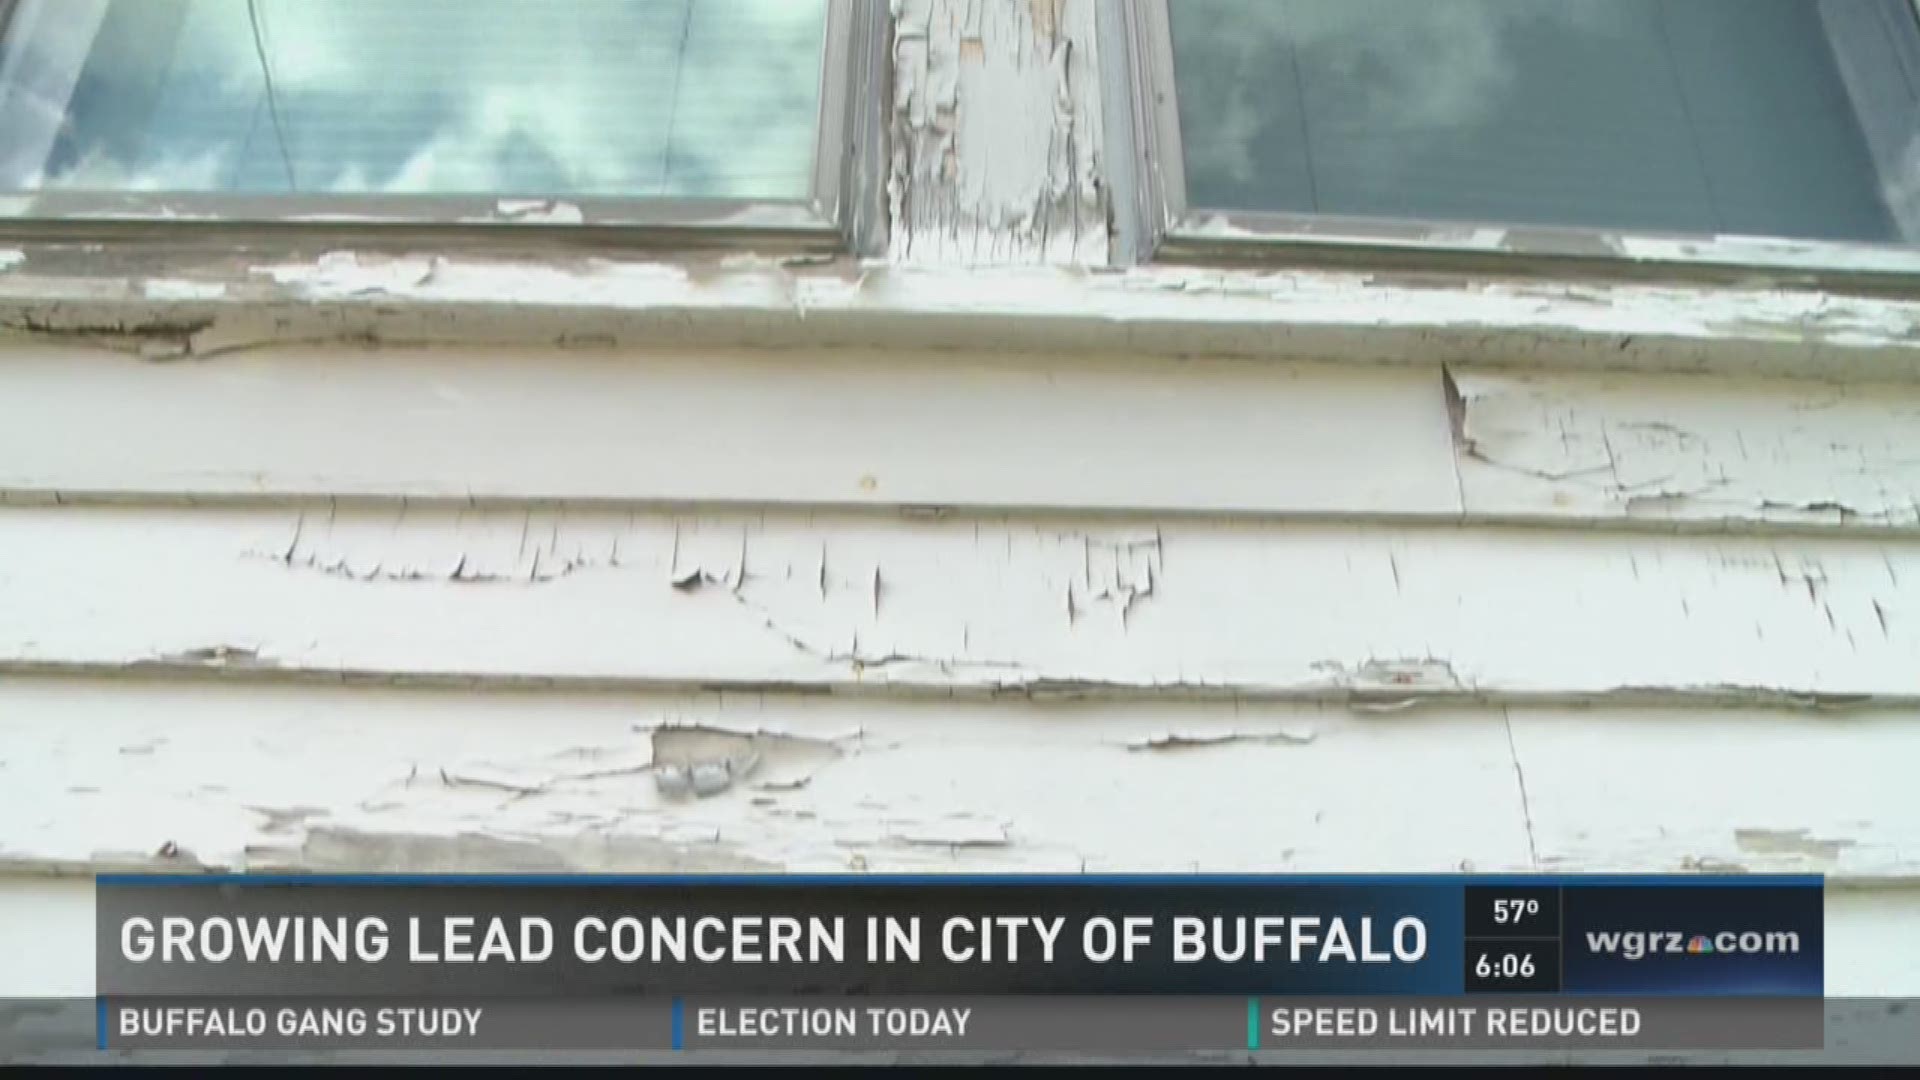 GROWING LEAD CONCERN IN CITY OF BUFFALO